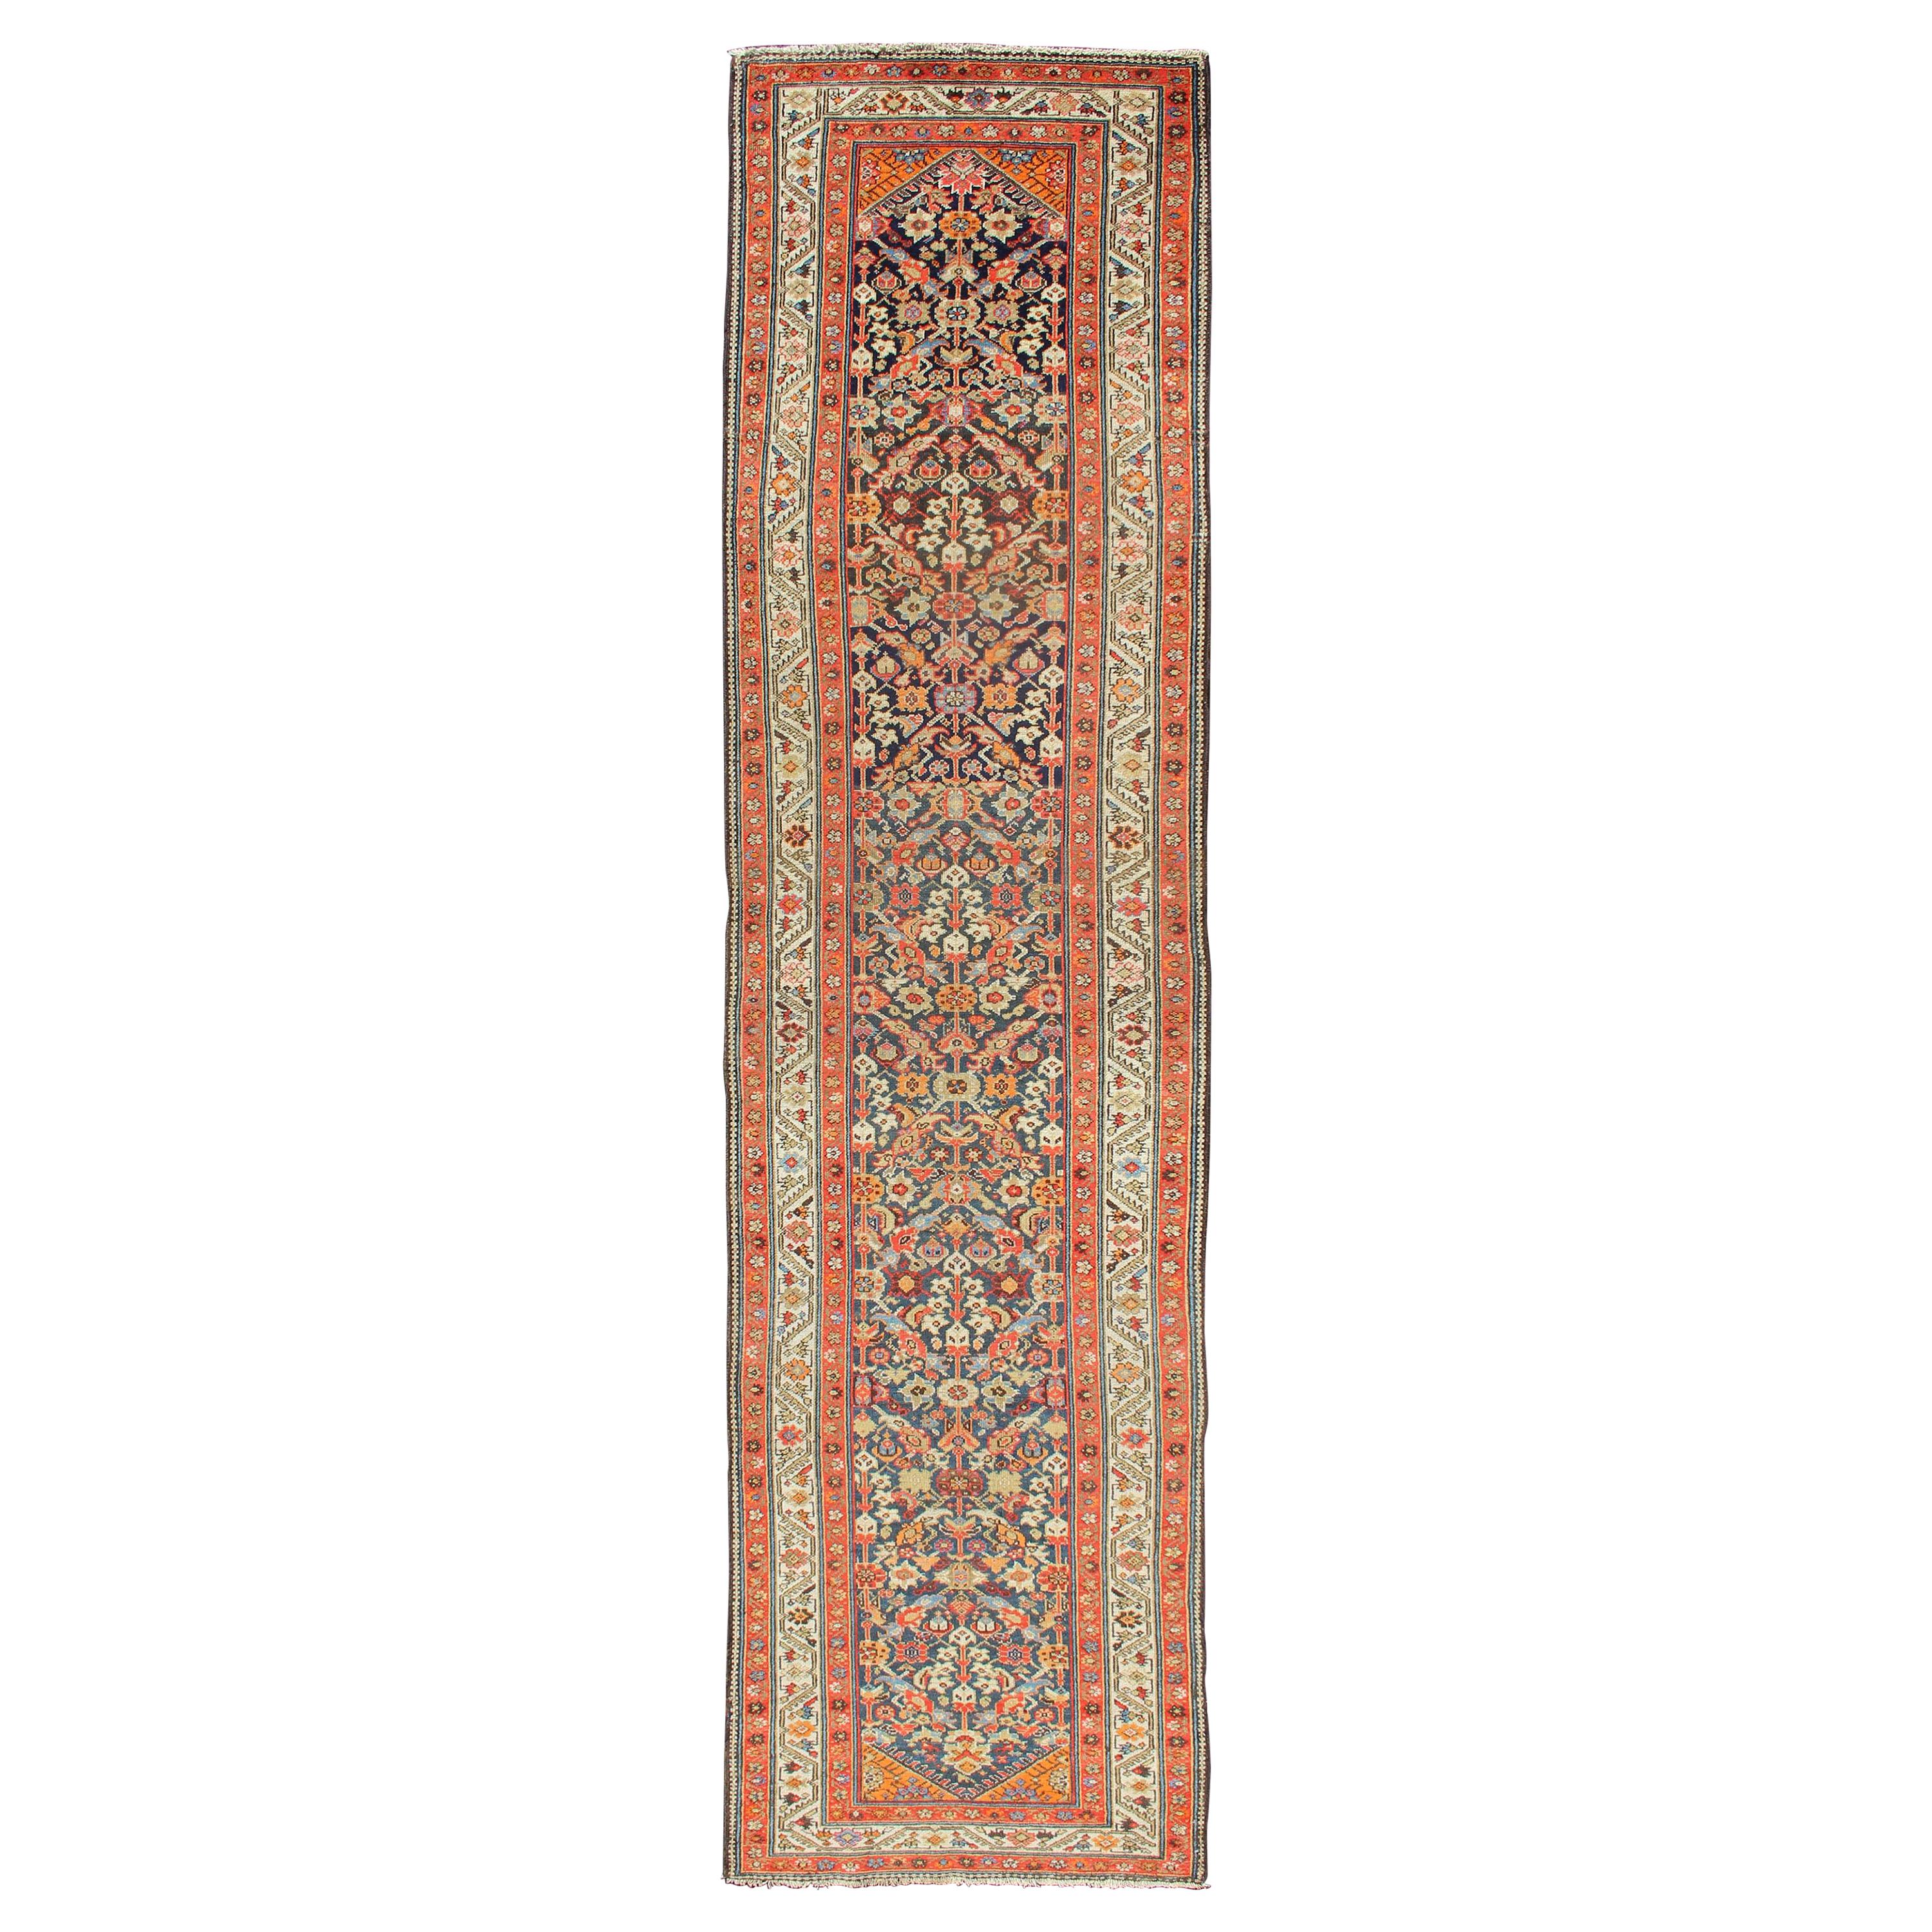 Long Persian Runner with Blue and Orange in Geometric All over Pattern